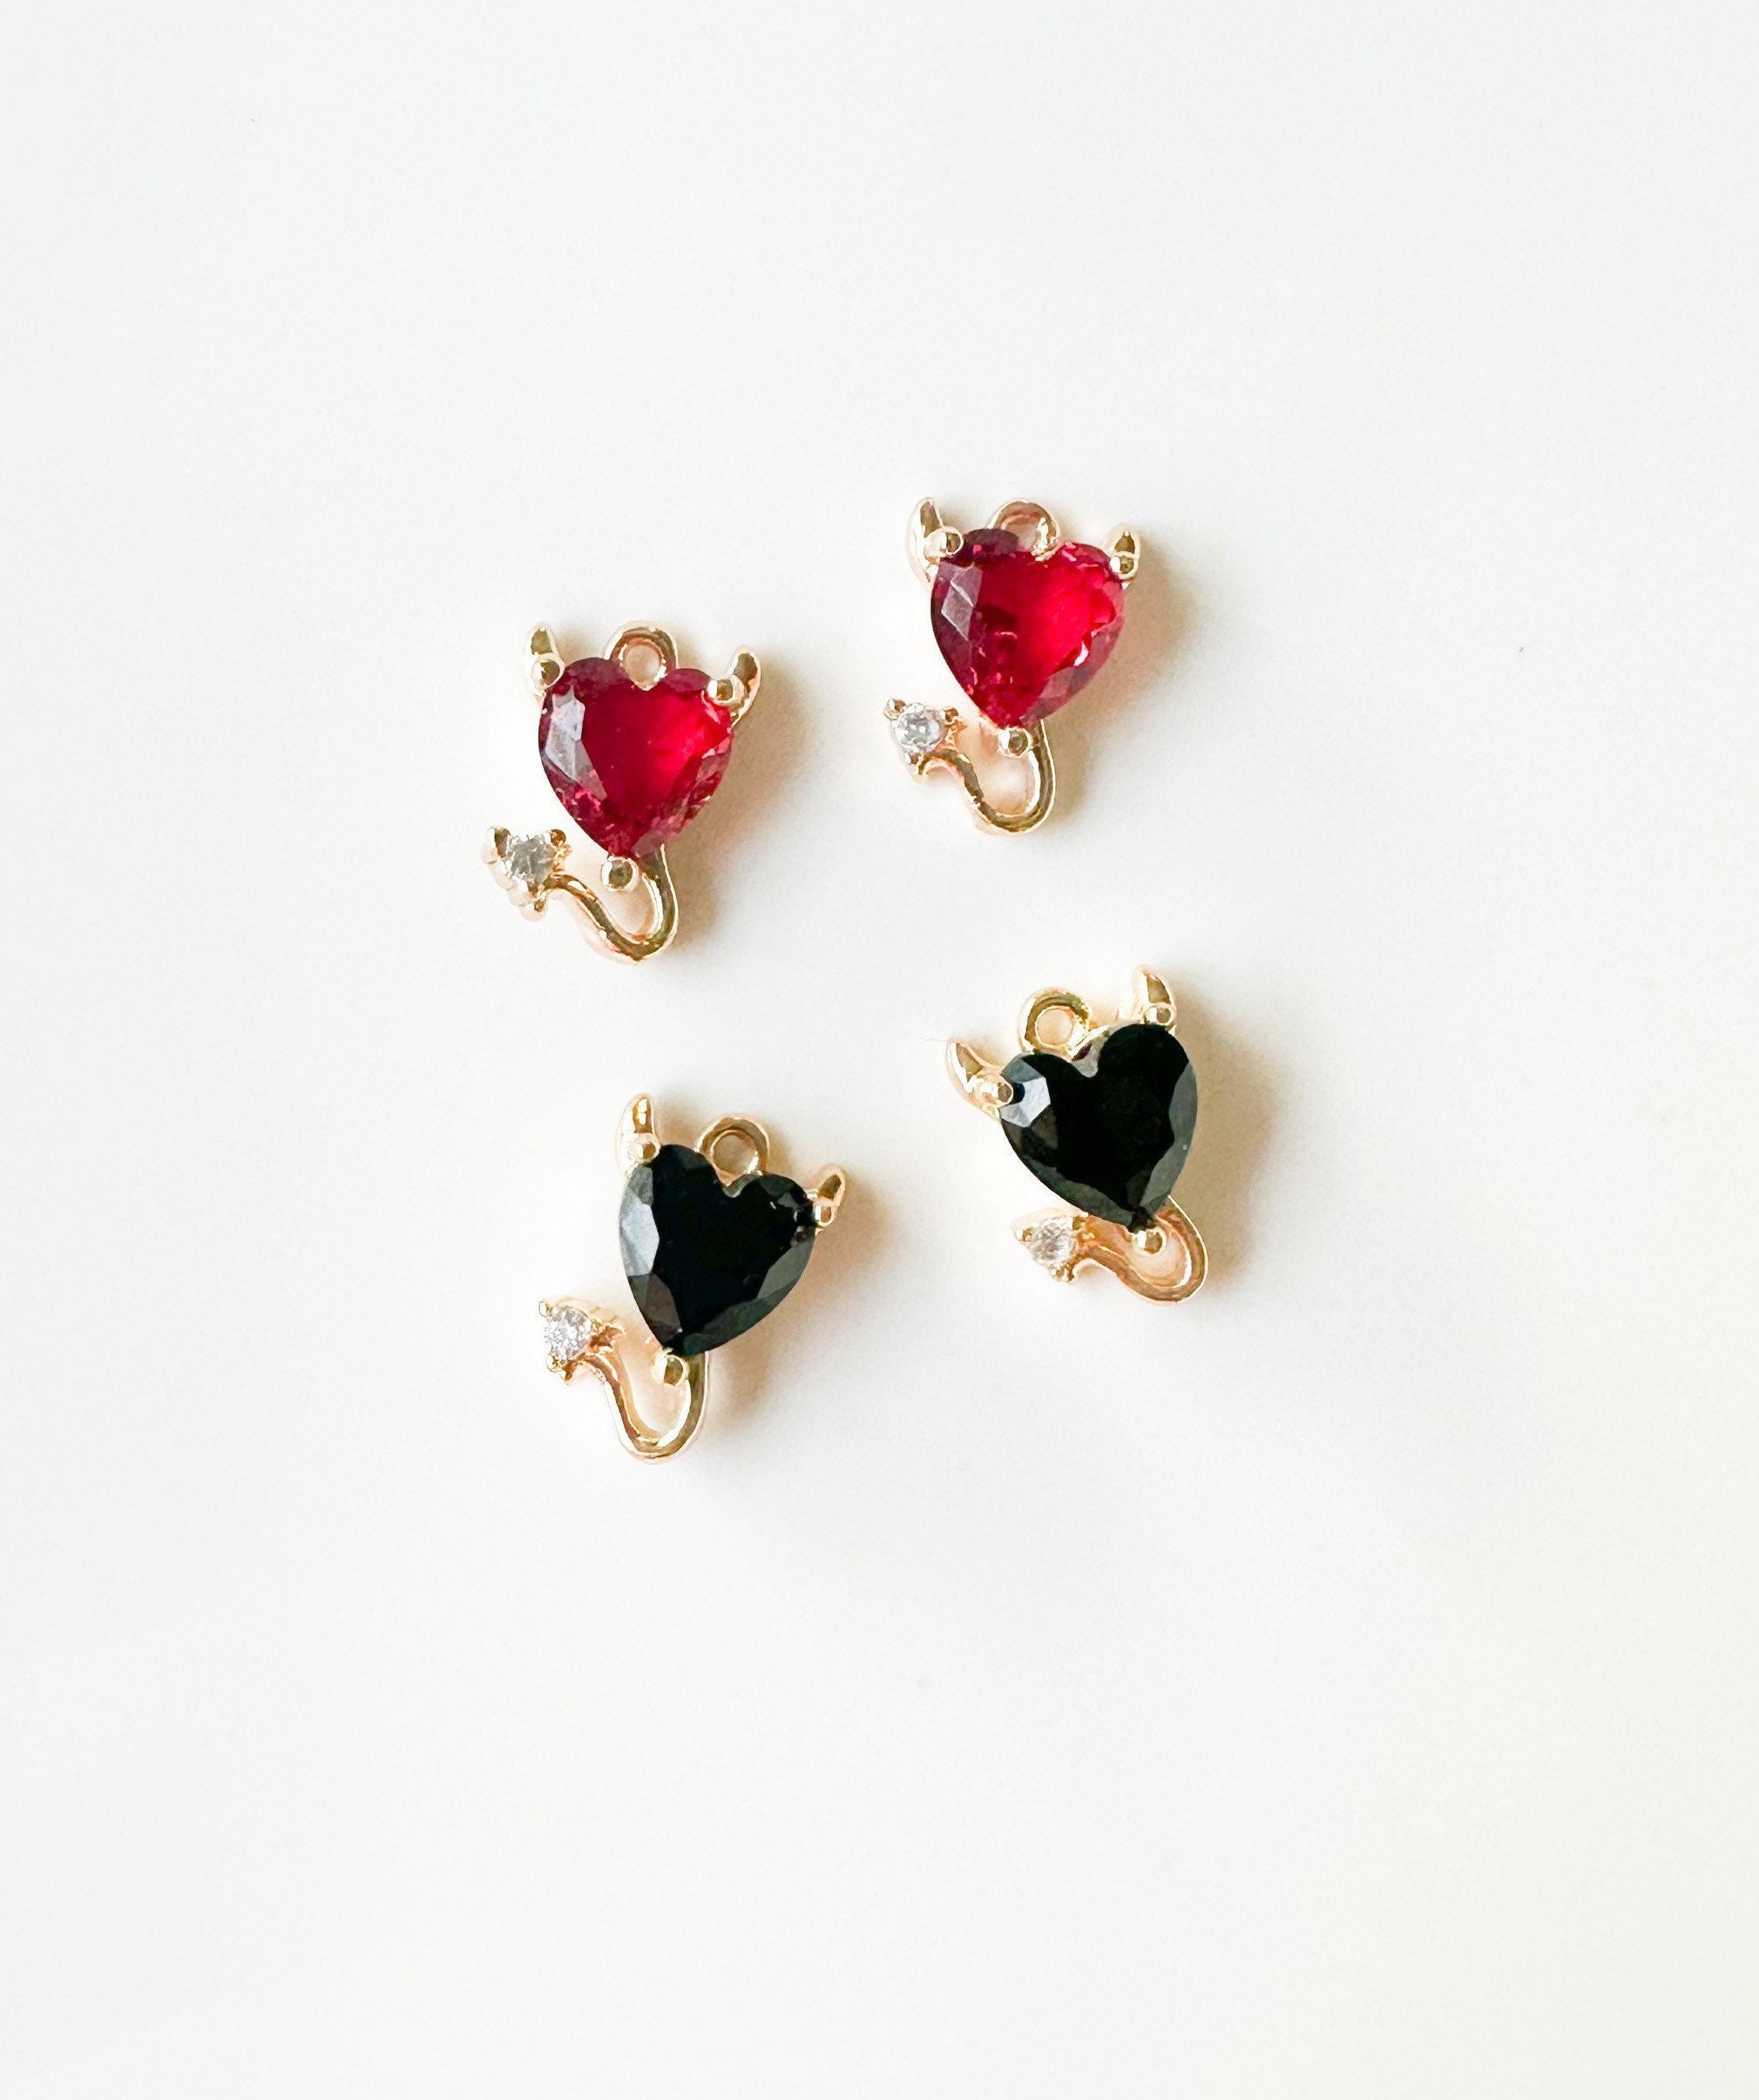 Devil Heart Earrings, Valentine Charms for Jewelry Making, Necklace Charms Heart, Heart Bracelet Charm, Cute Charms for Keychain